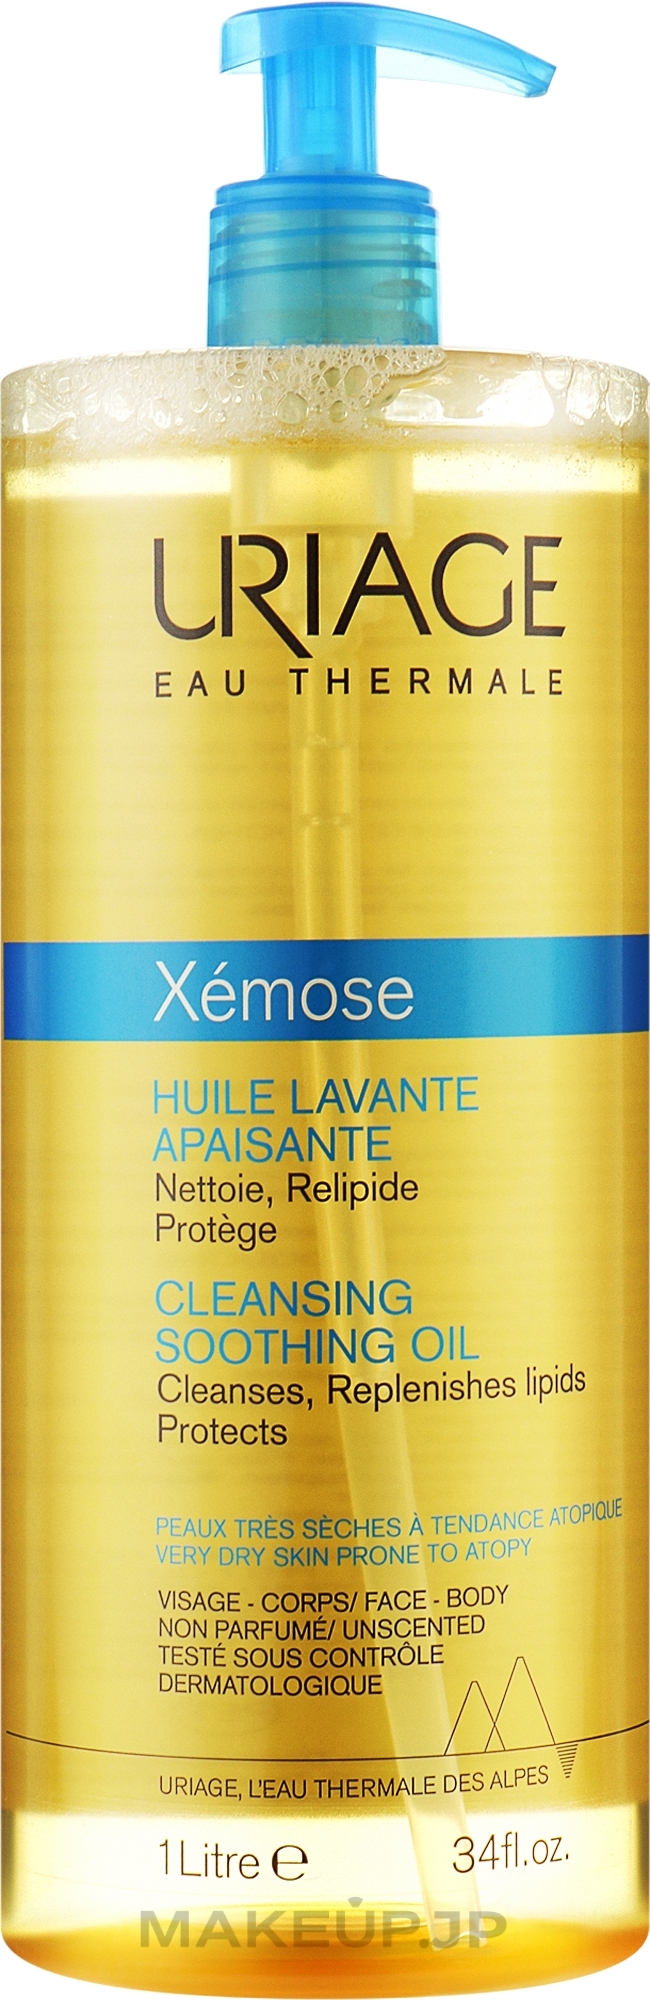 Cleansing Soothing Face and Body Oil - Uriage Xemose Cleansing Soothing Oil — photo 1000 ml